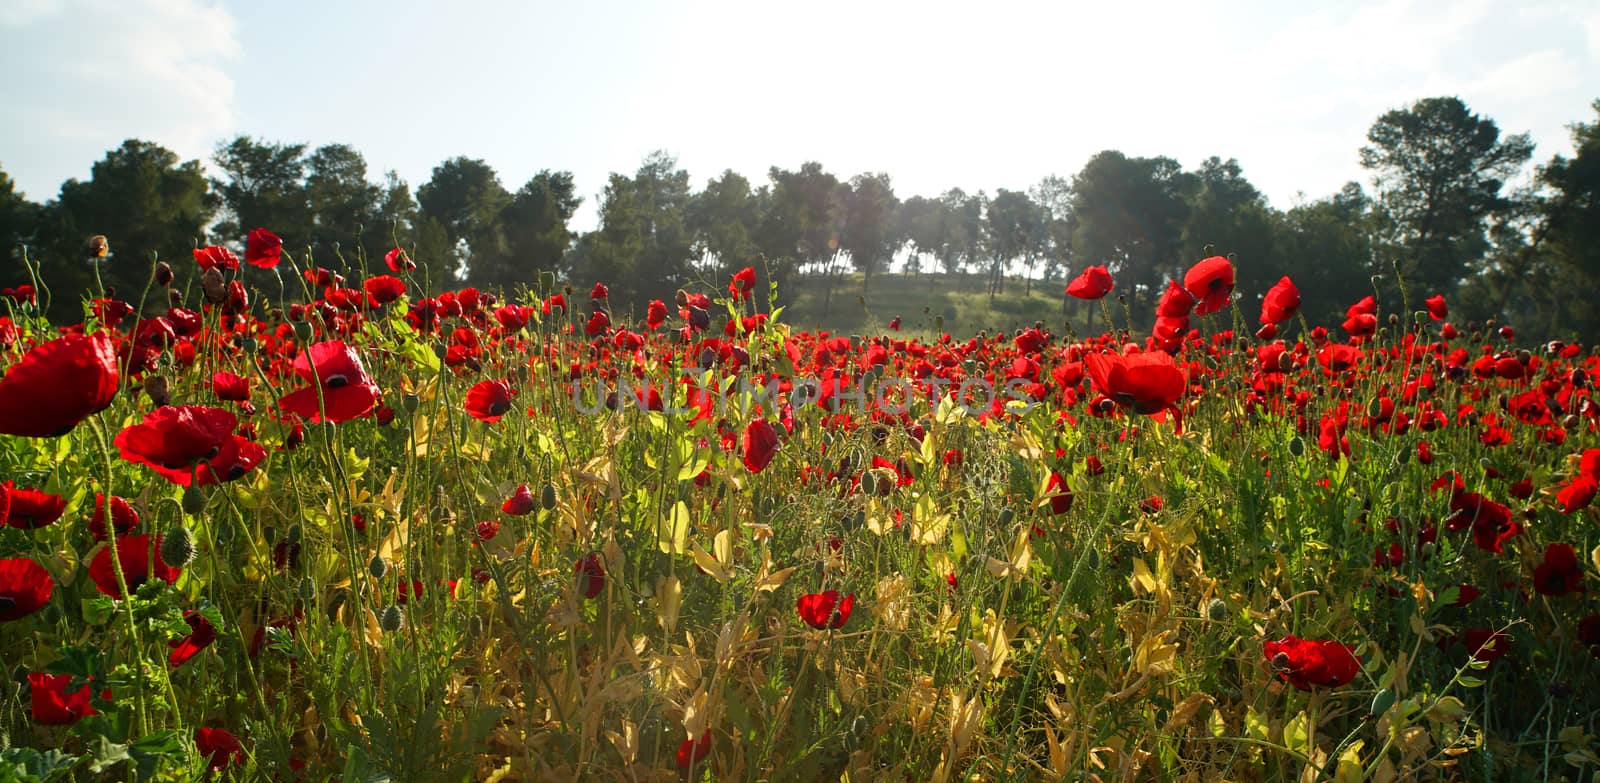 rural landscape, a field of flowering red poppies